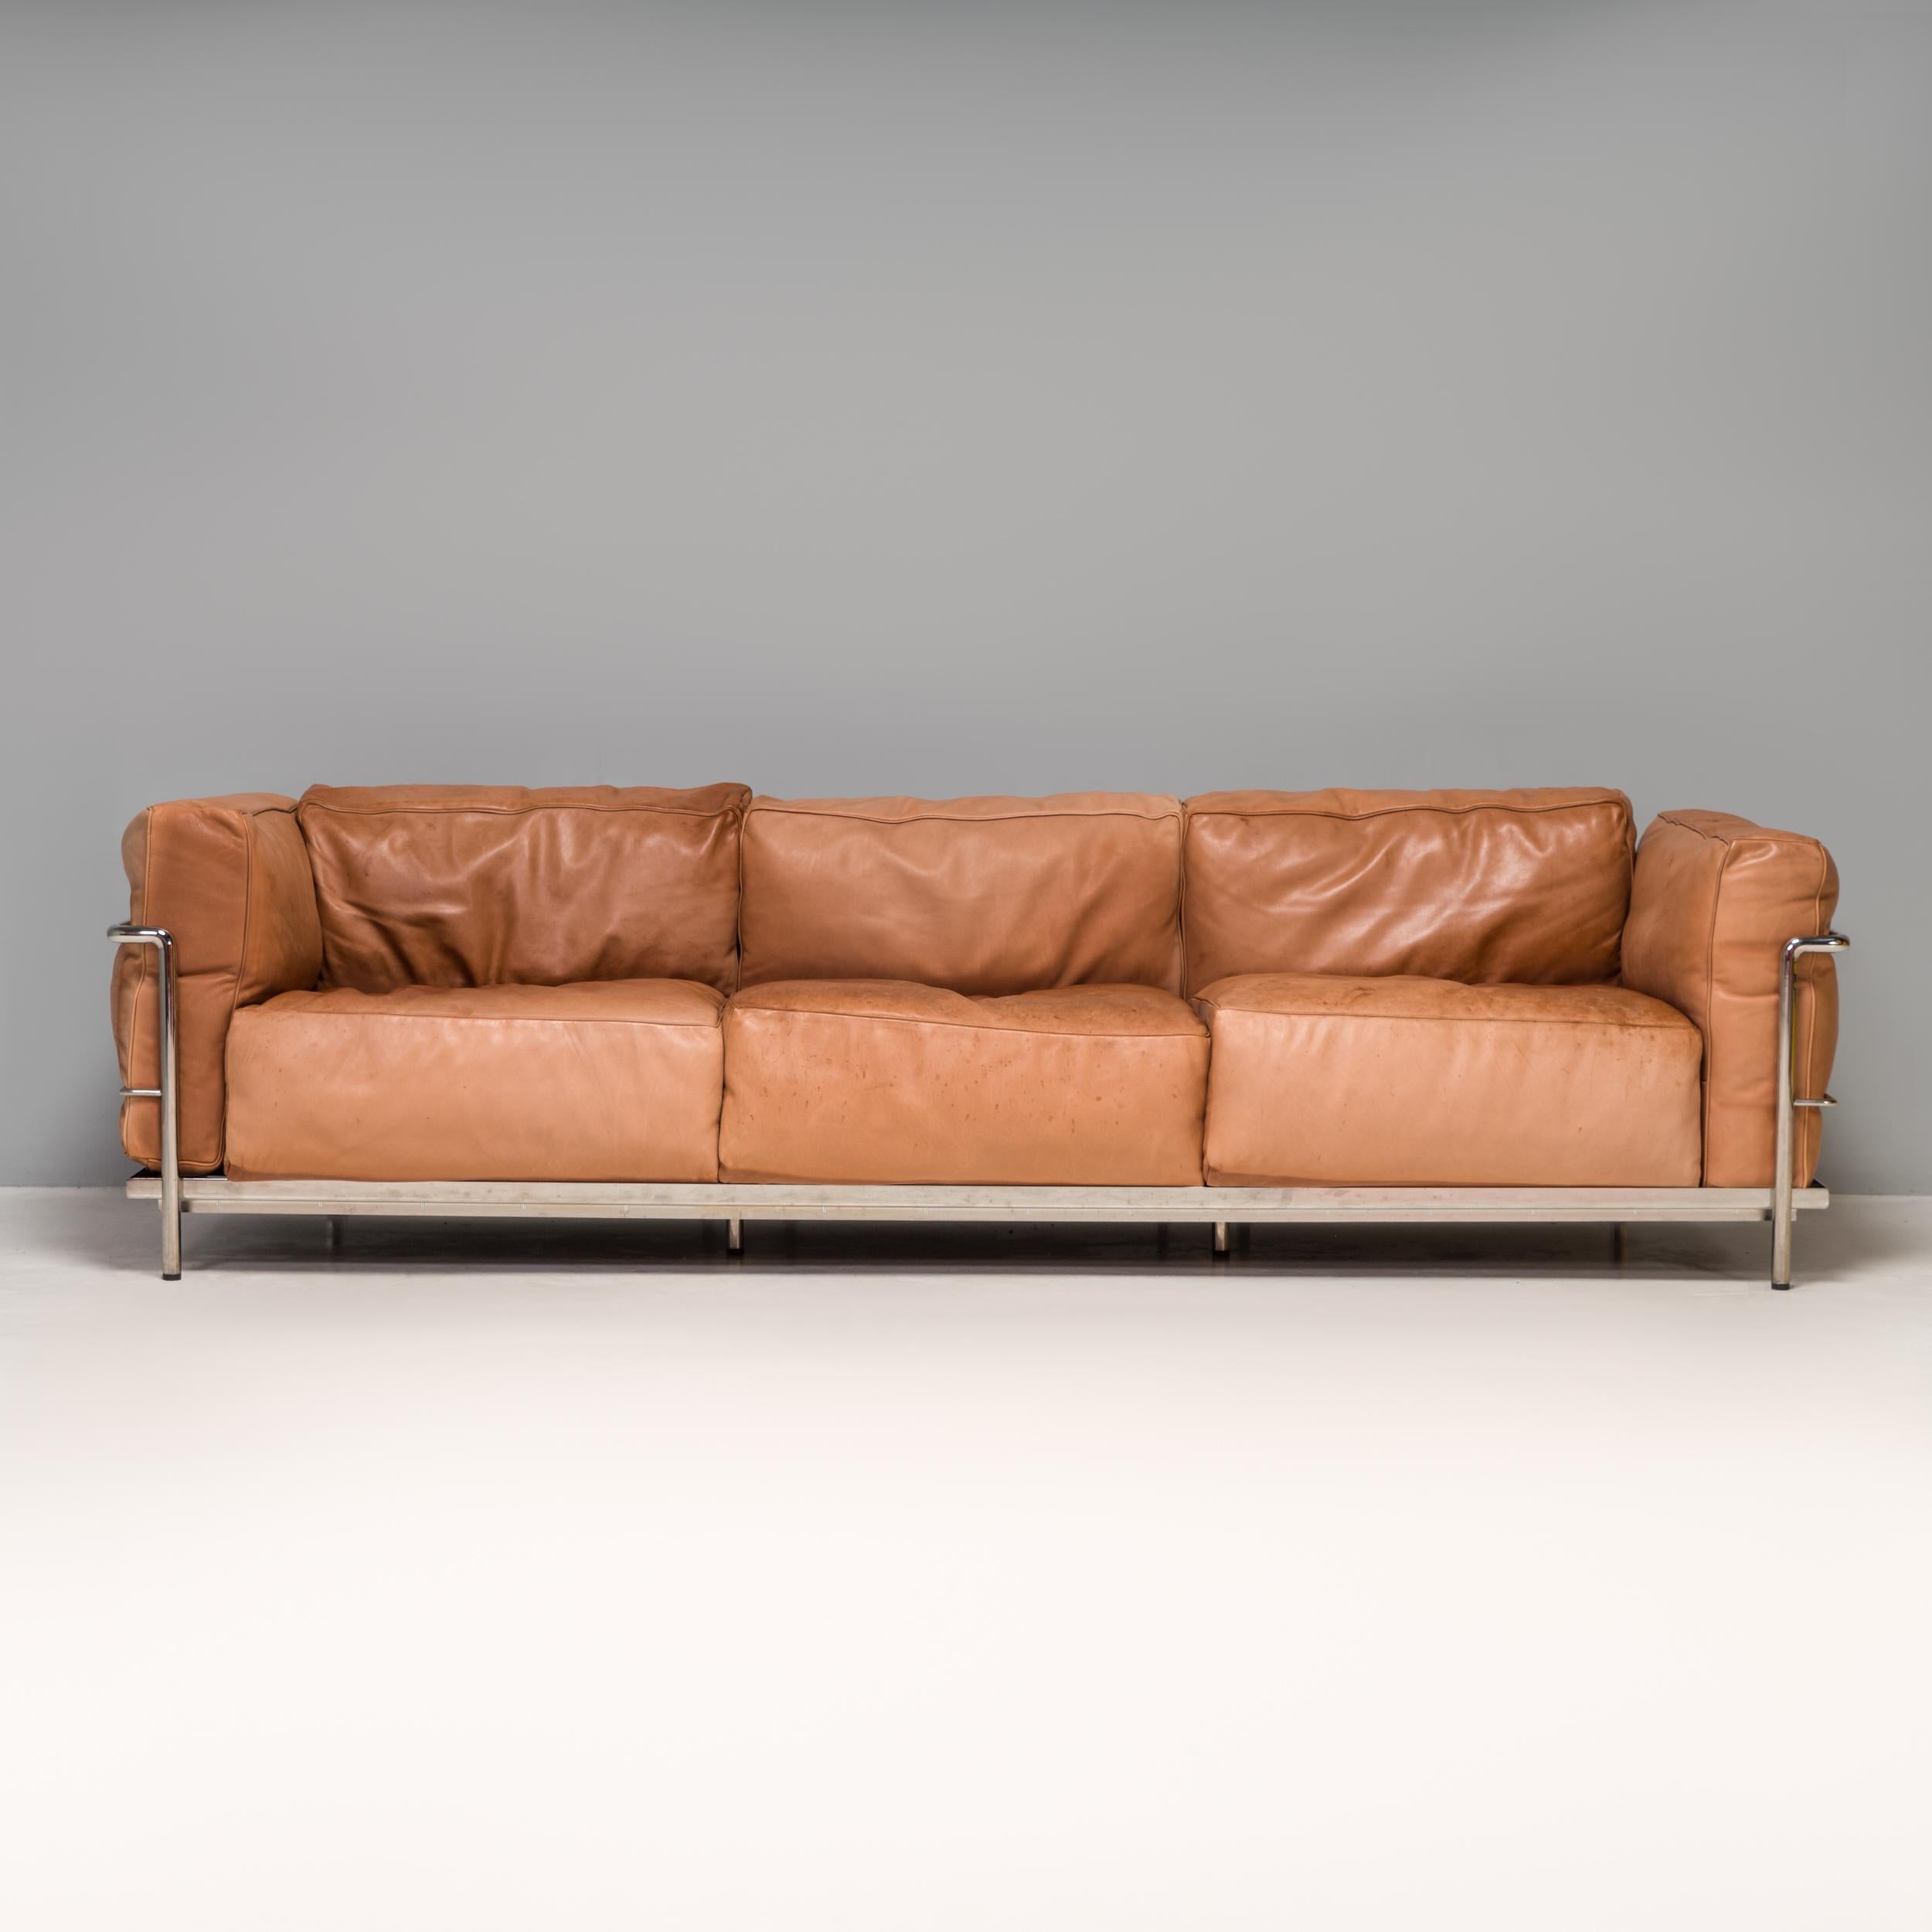 Originally designed in 1928 by Le Corbusier, Pierre Jeanneret and Charlotte Perriand, the LC3 sofa has since become a design icon and was re-issued by Cassina in 1965.

One of the first sofa designs to make a feature of the structure, the sofa has a